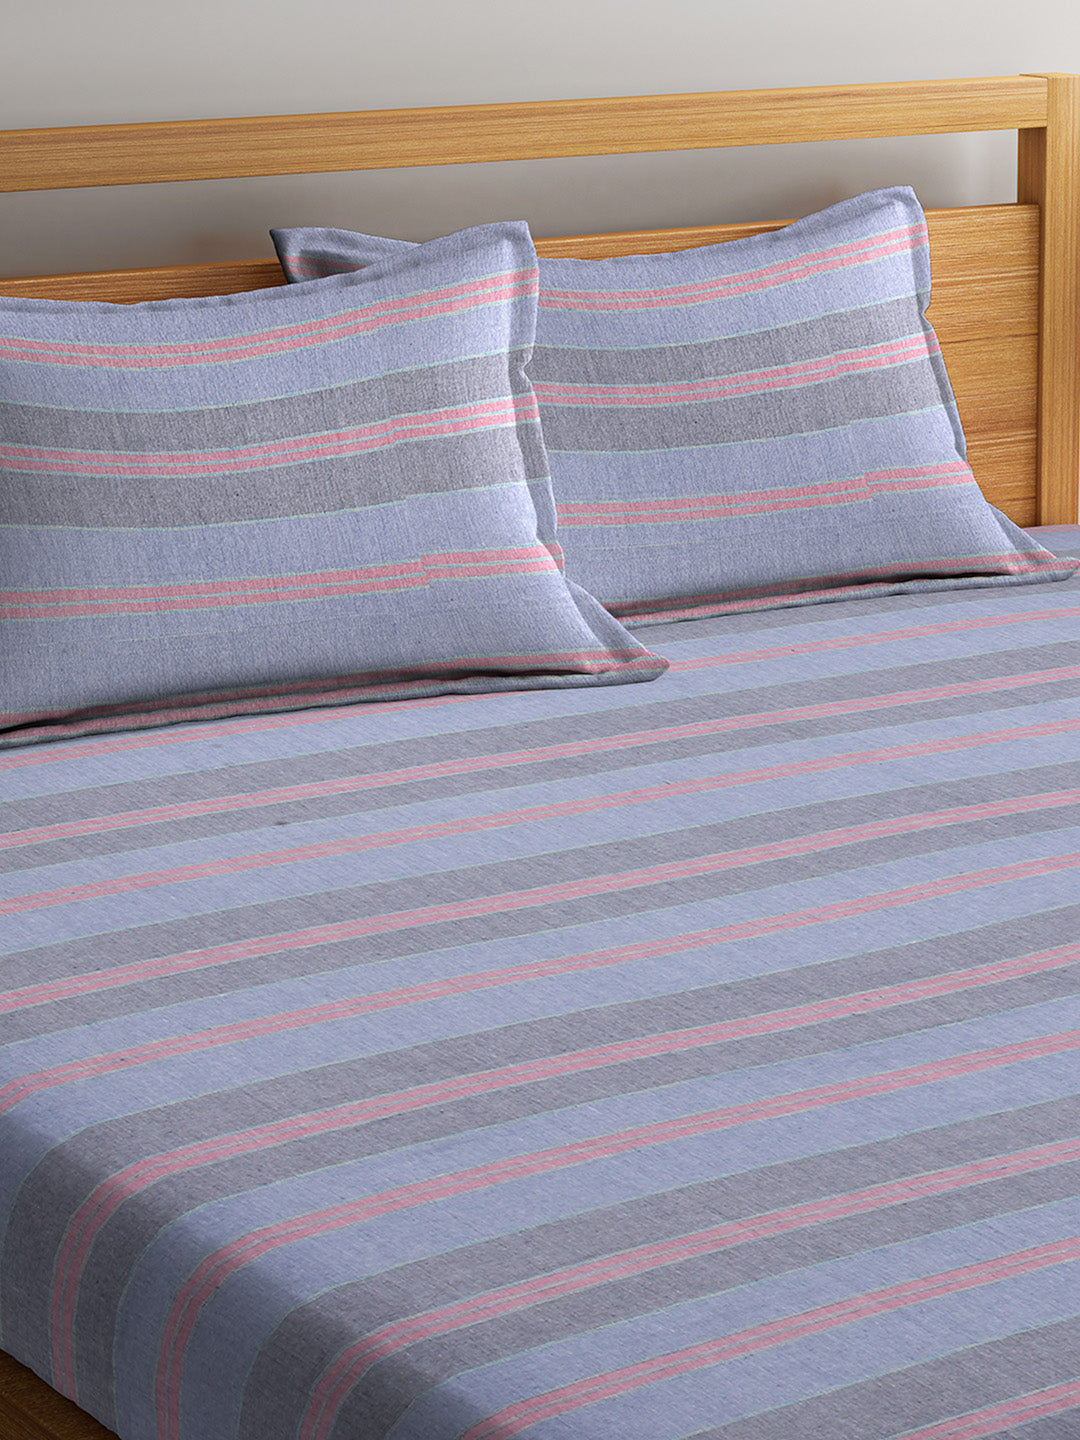 Arrabi Blue & Pink Striped Handwoven Cotton Double King Size Bedsheet with 2 Pillow Covers (260 x 260 cm)